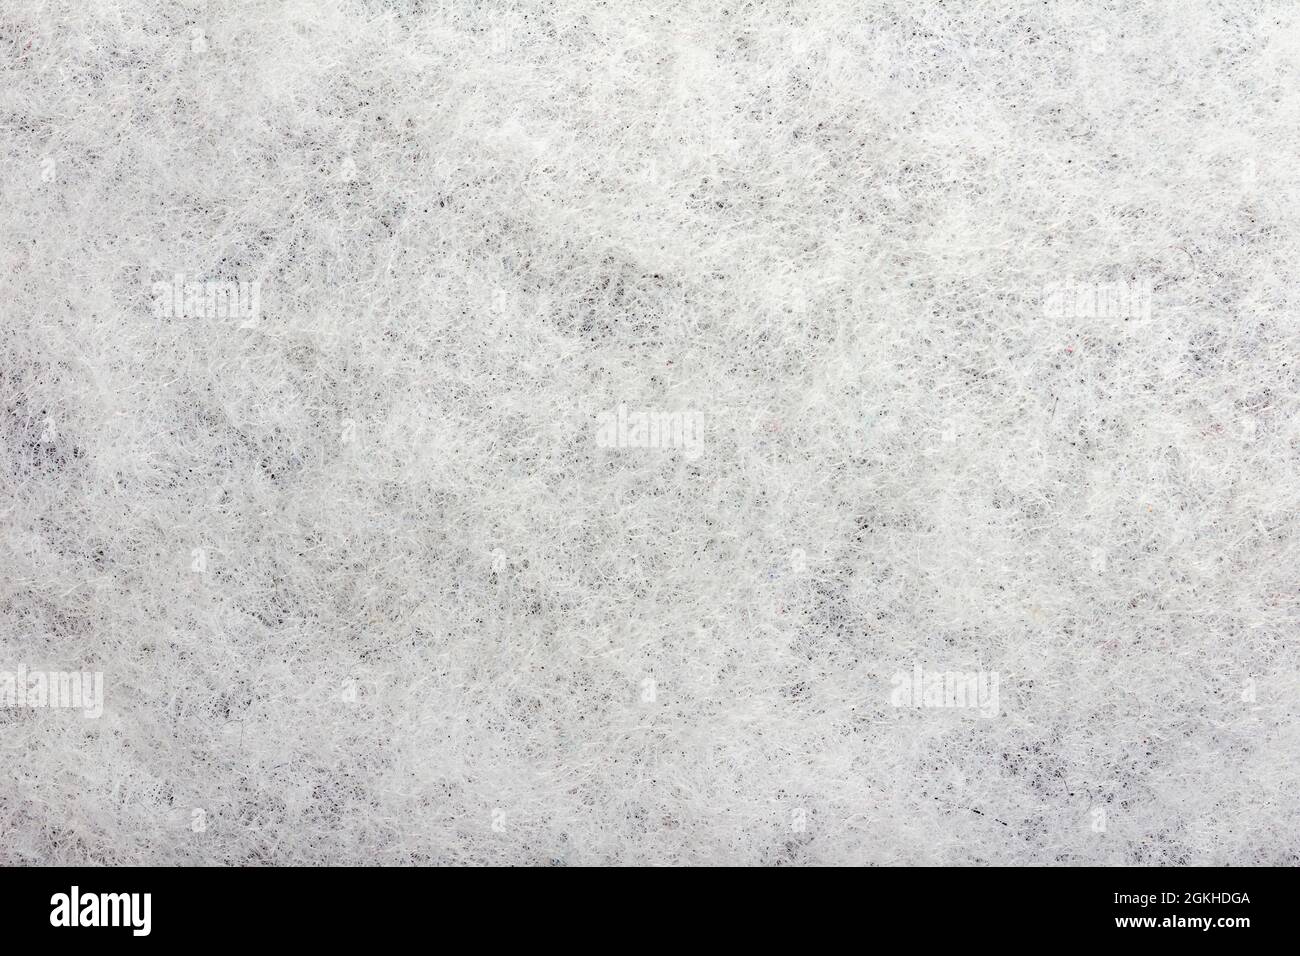 Texture backdrop photo of white colored sintepon fibers material. Stock Photo